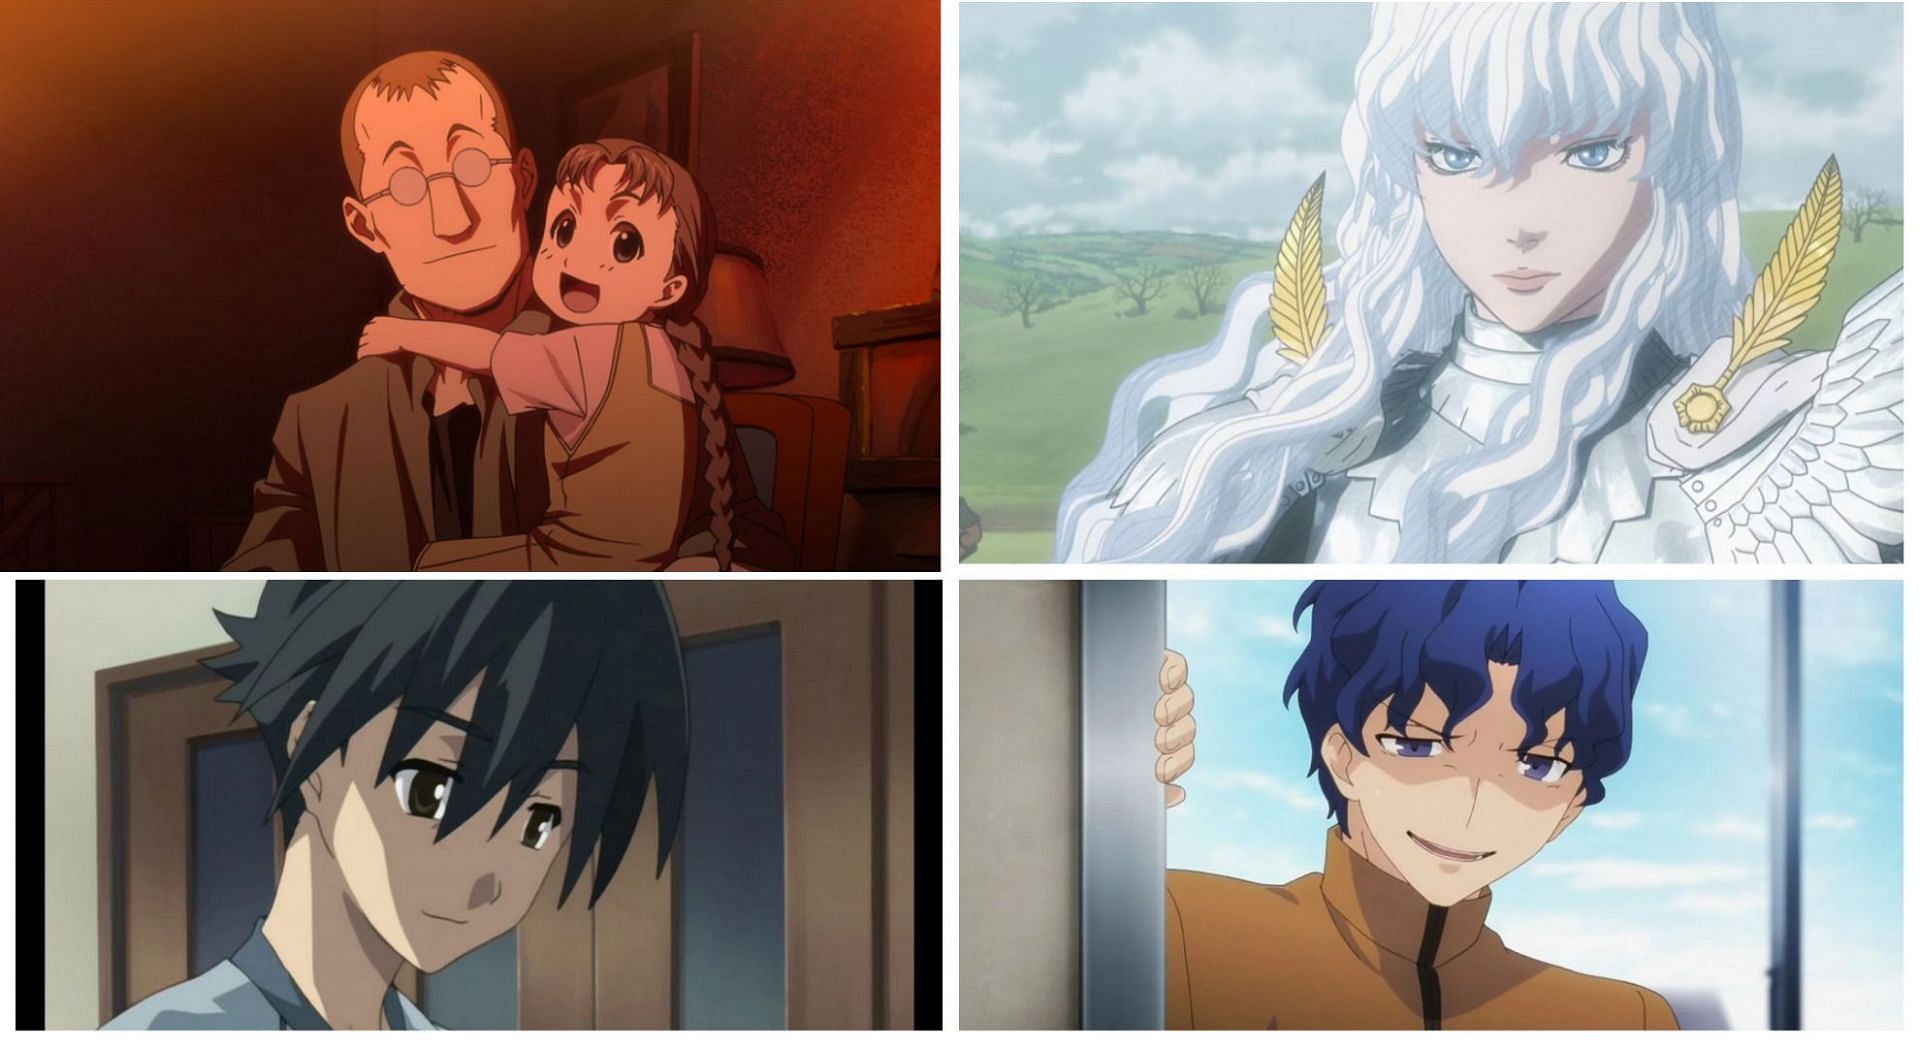 35 Most Popular Characters In Anime History According To MyAnimeList